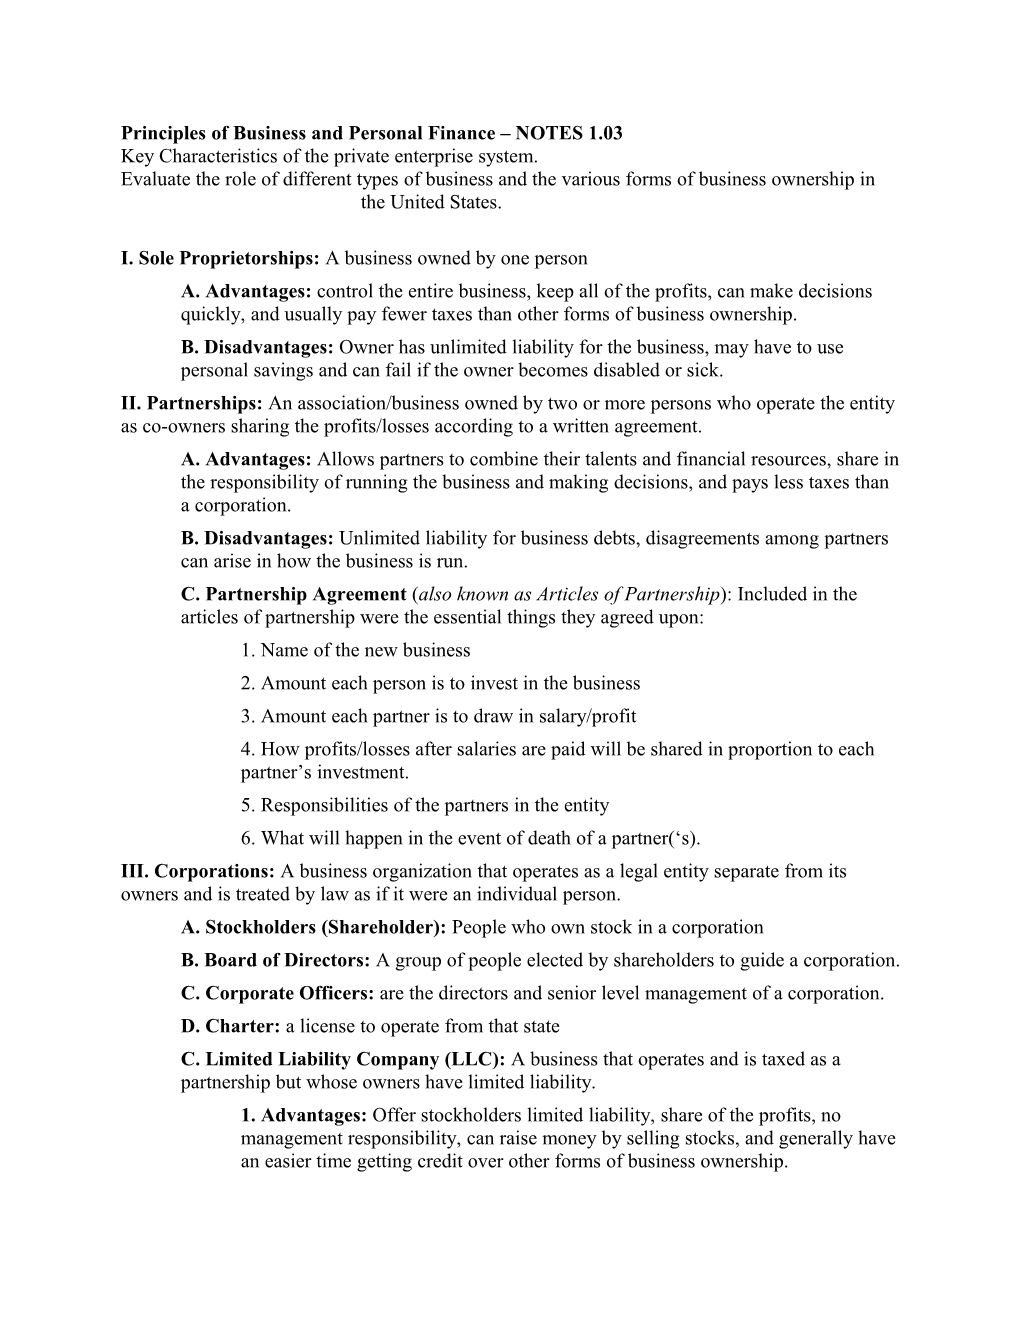 Principles of Business and Personal Finance NOTES 1.03